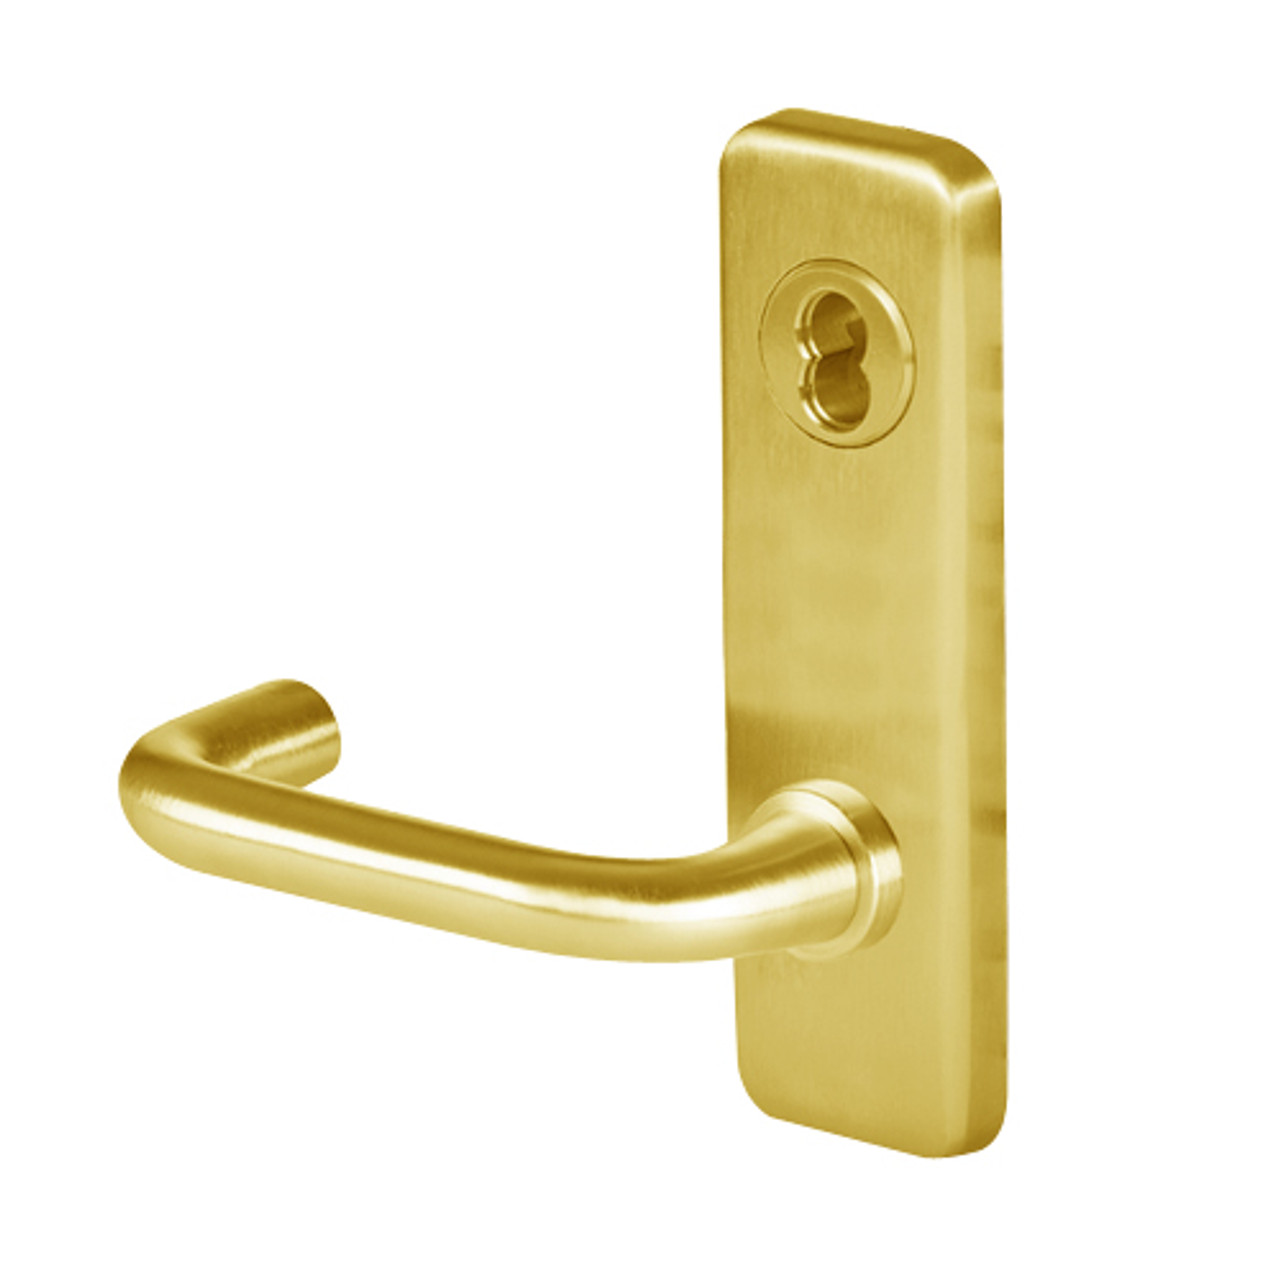 45HW7DEL3J605 Best 40HW series Single Key Latch Fail Safe Electromechanical Mortise Lever Lock with Solid Tube w/ Return Style in Bright Brass